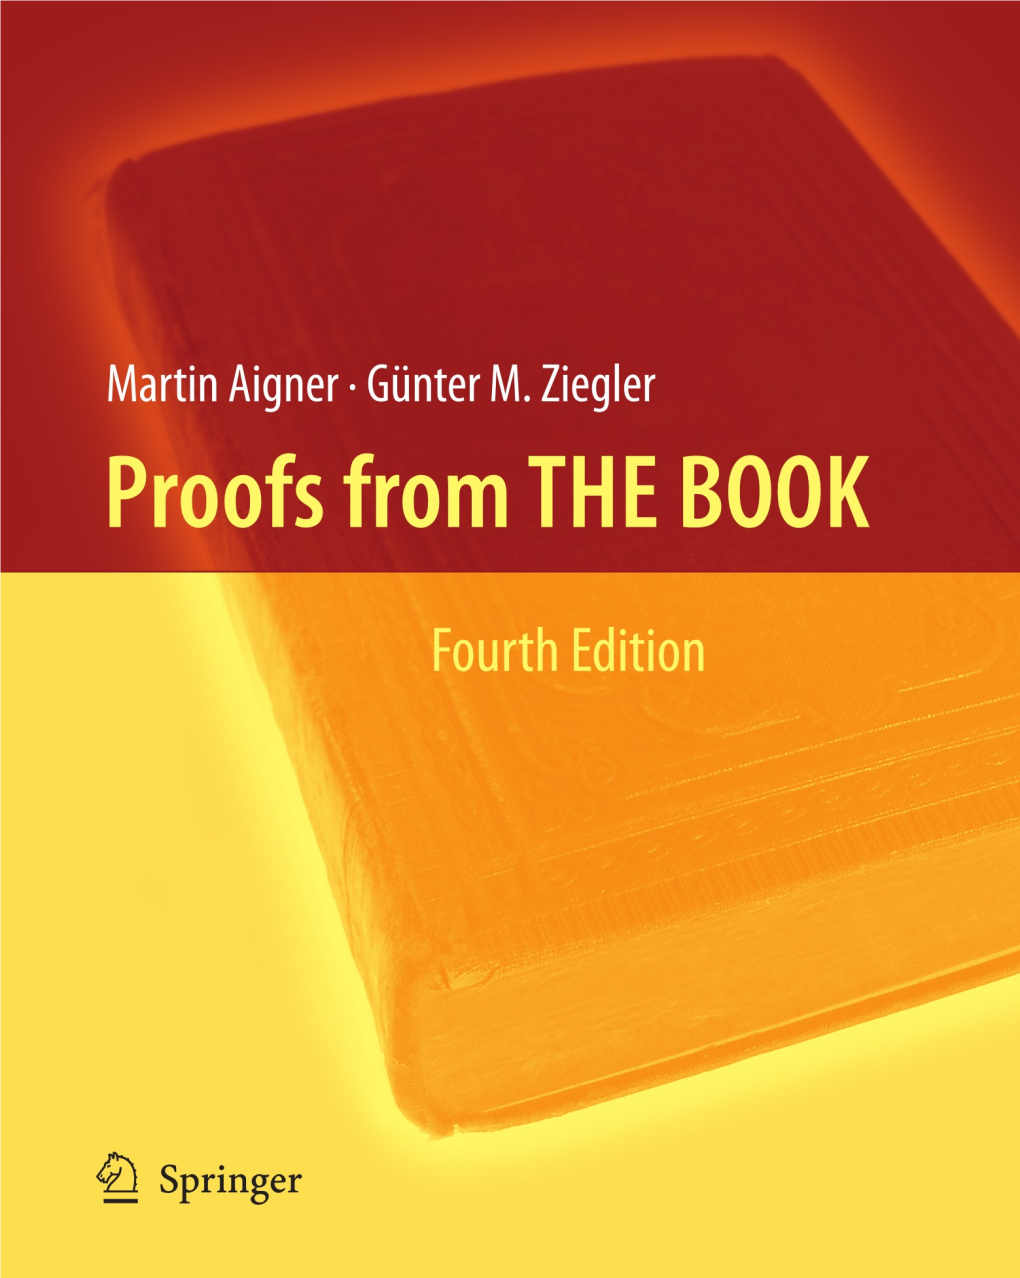 Proofs from the BOOK Fourth Edition Martin Aigner Günter M